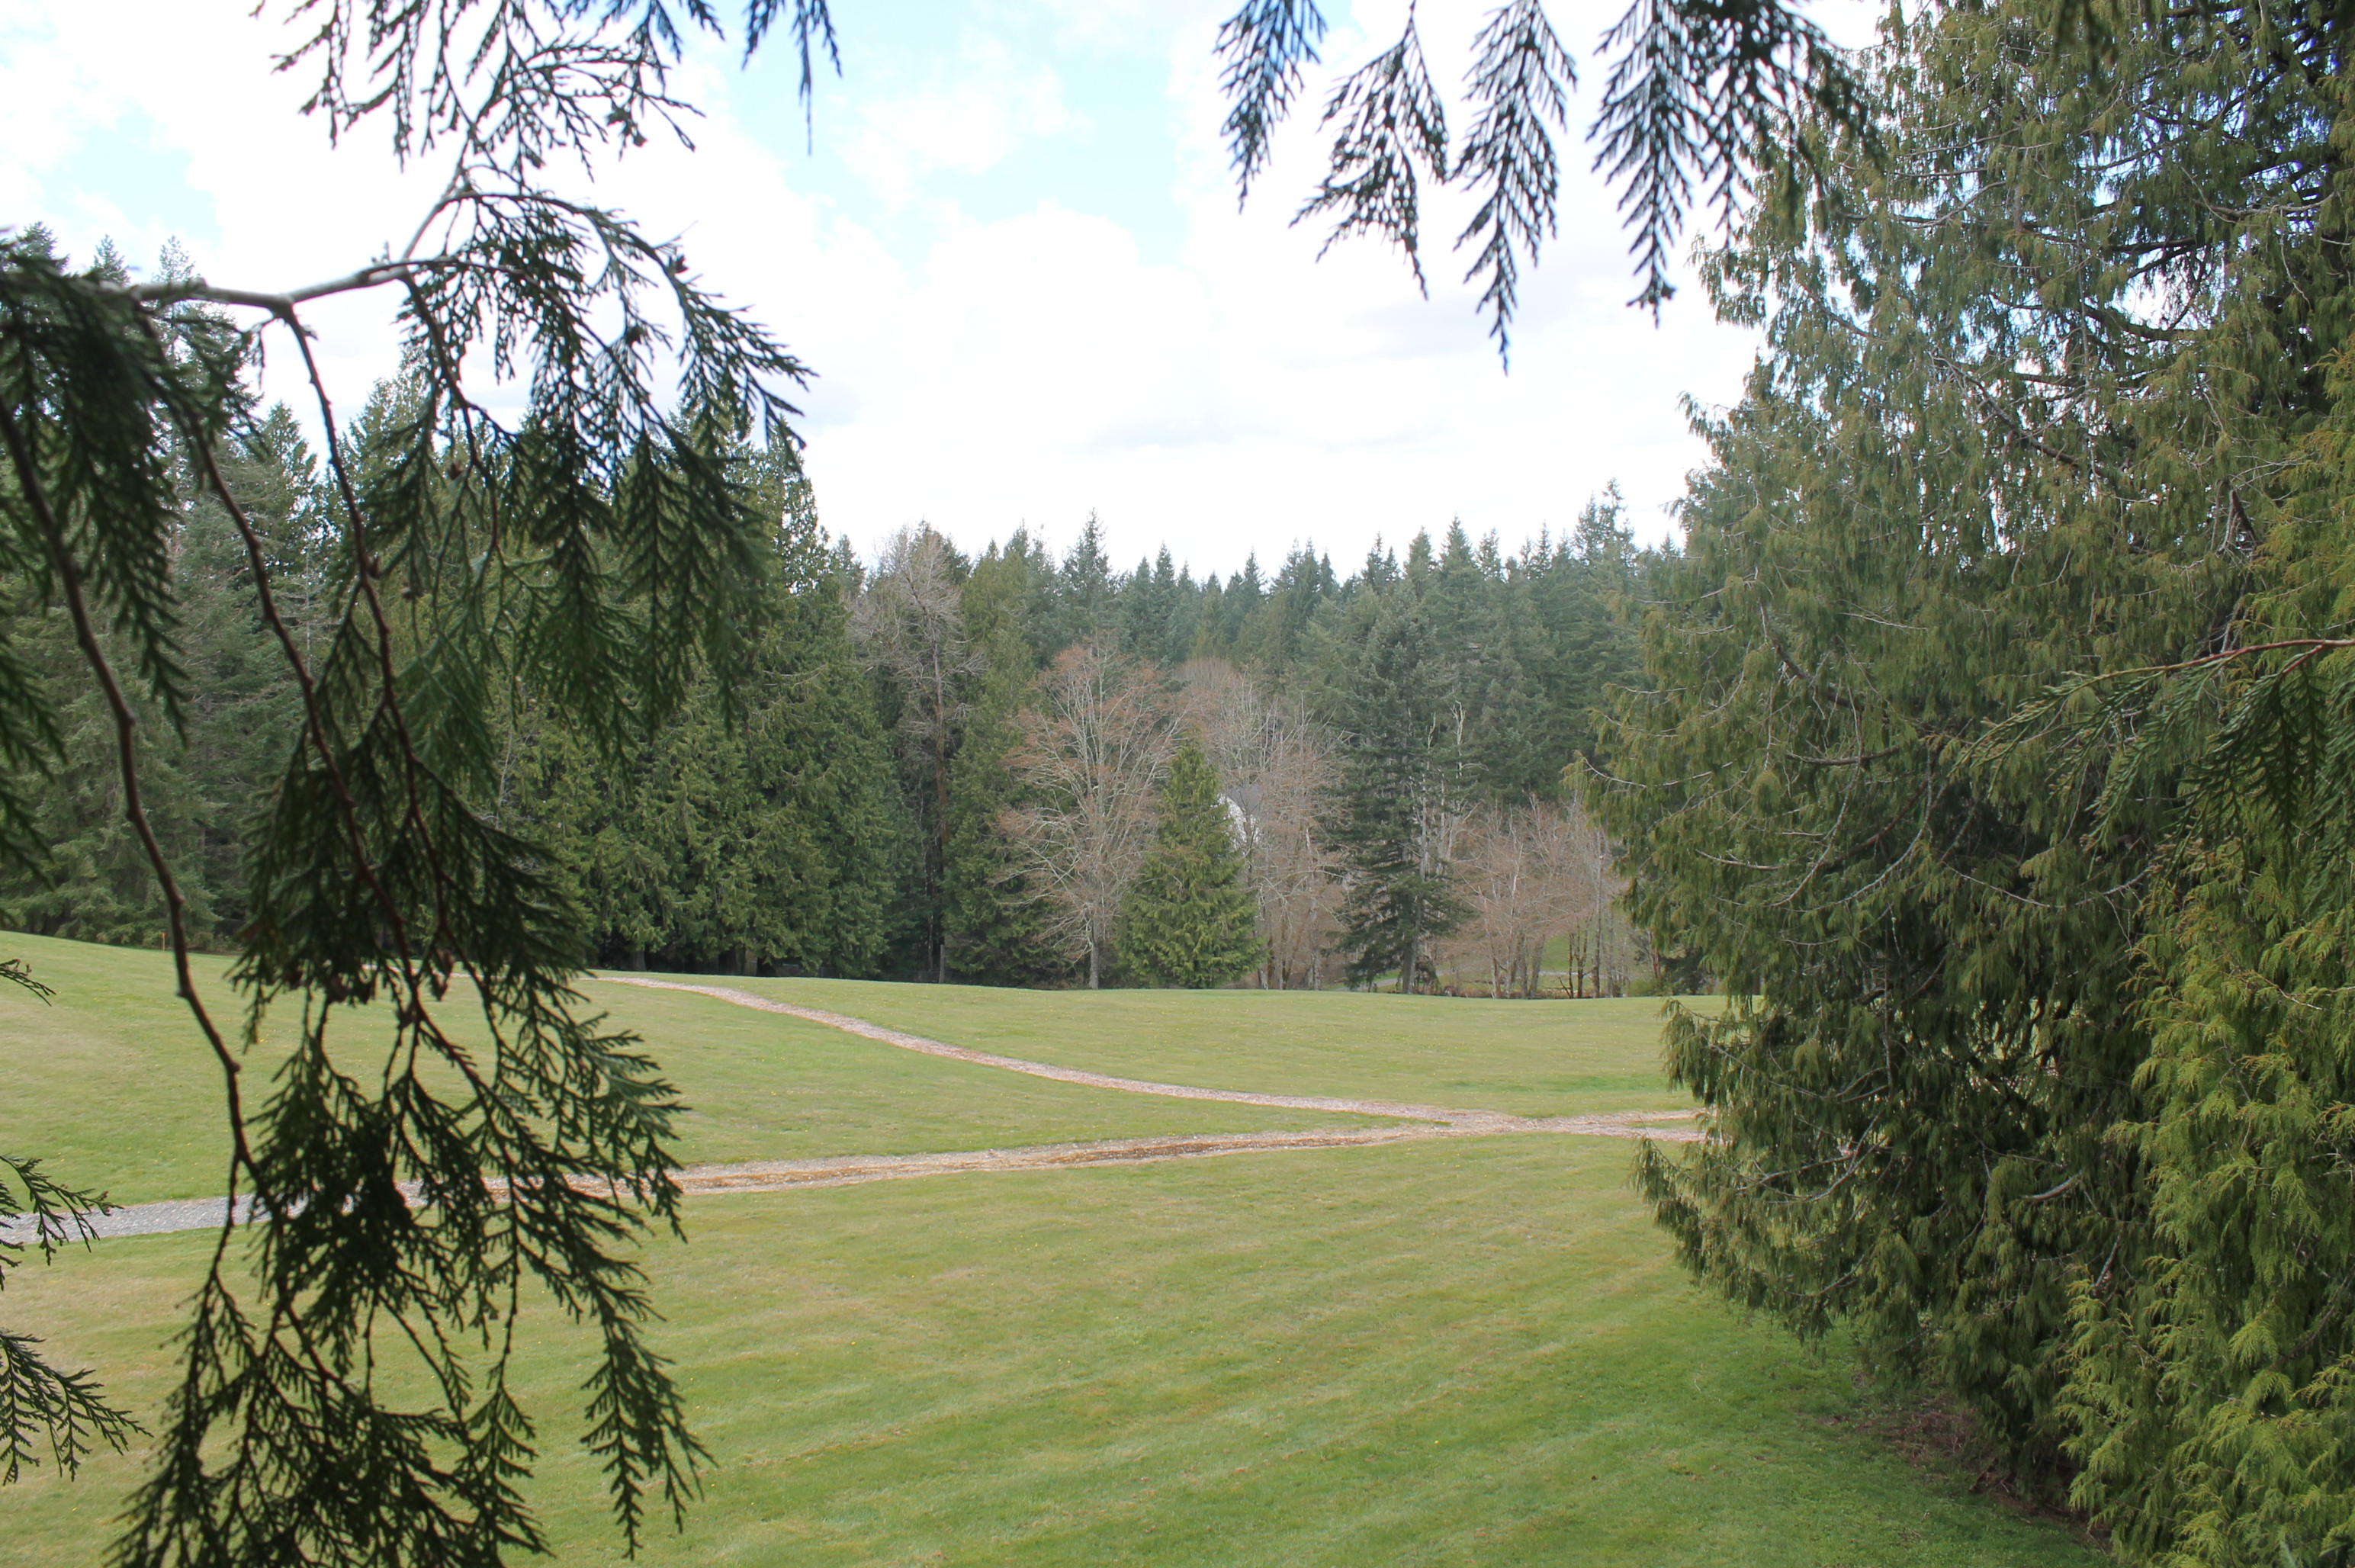 looking through a gap between cedar trees across a wide sloped lawn with criss-crossing dirt paths